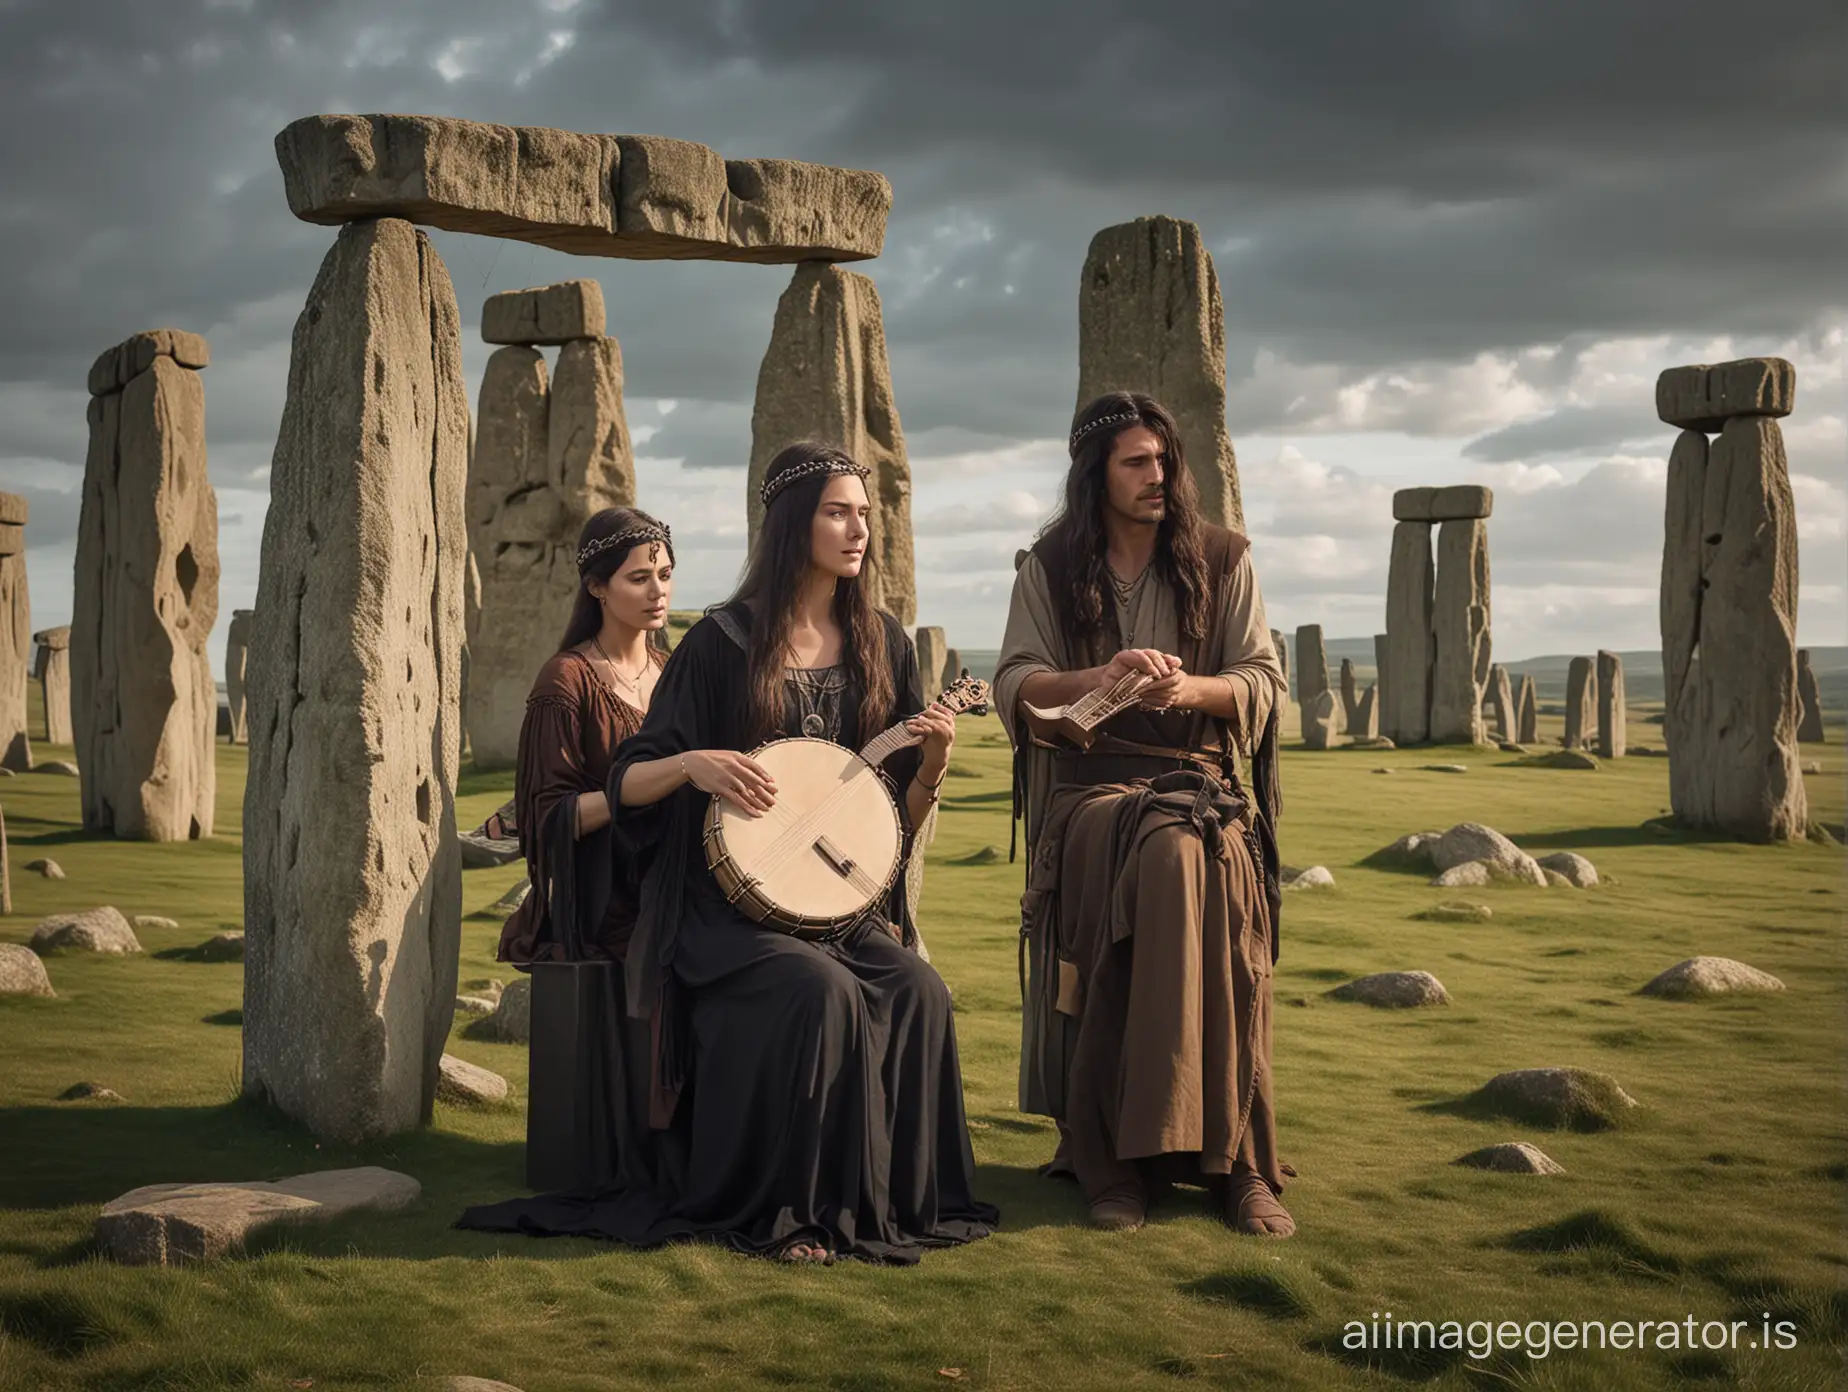 slender dark haired norse witch and a man of the same size playing music on small lyre and hand drum in an ancient stonehenge